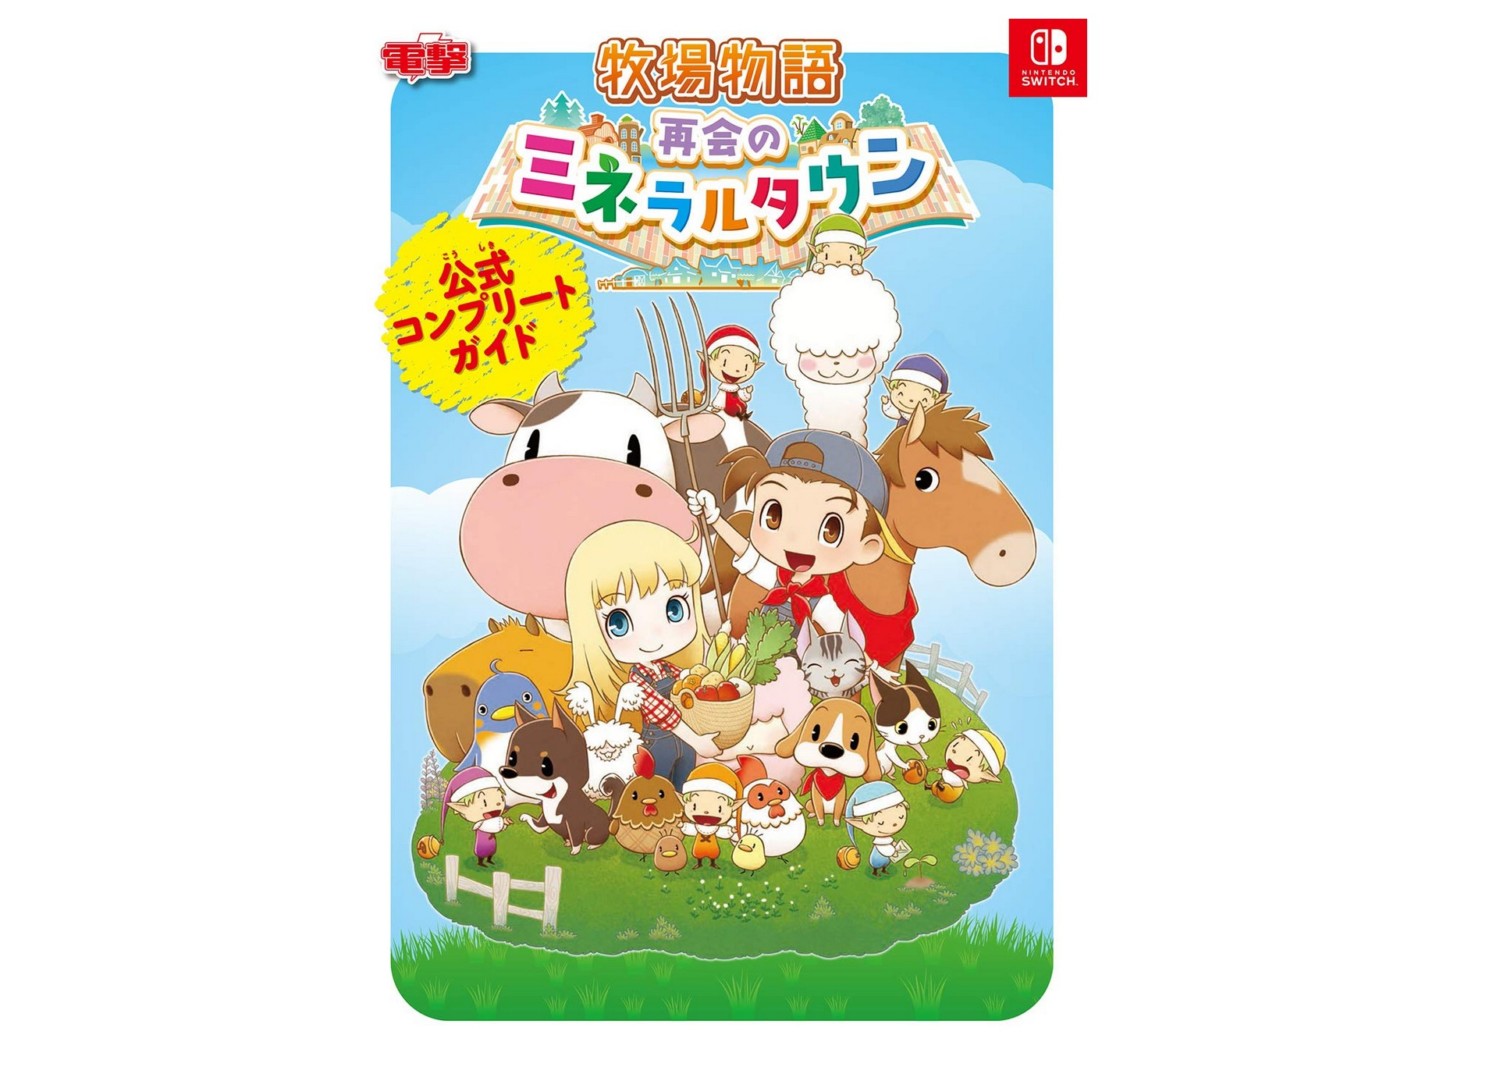 of NintendoSoup OF Guidebook Japan SEASONS: – In Mineral Friends STORY Town Announced